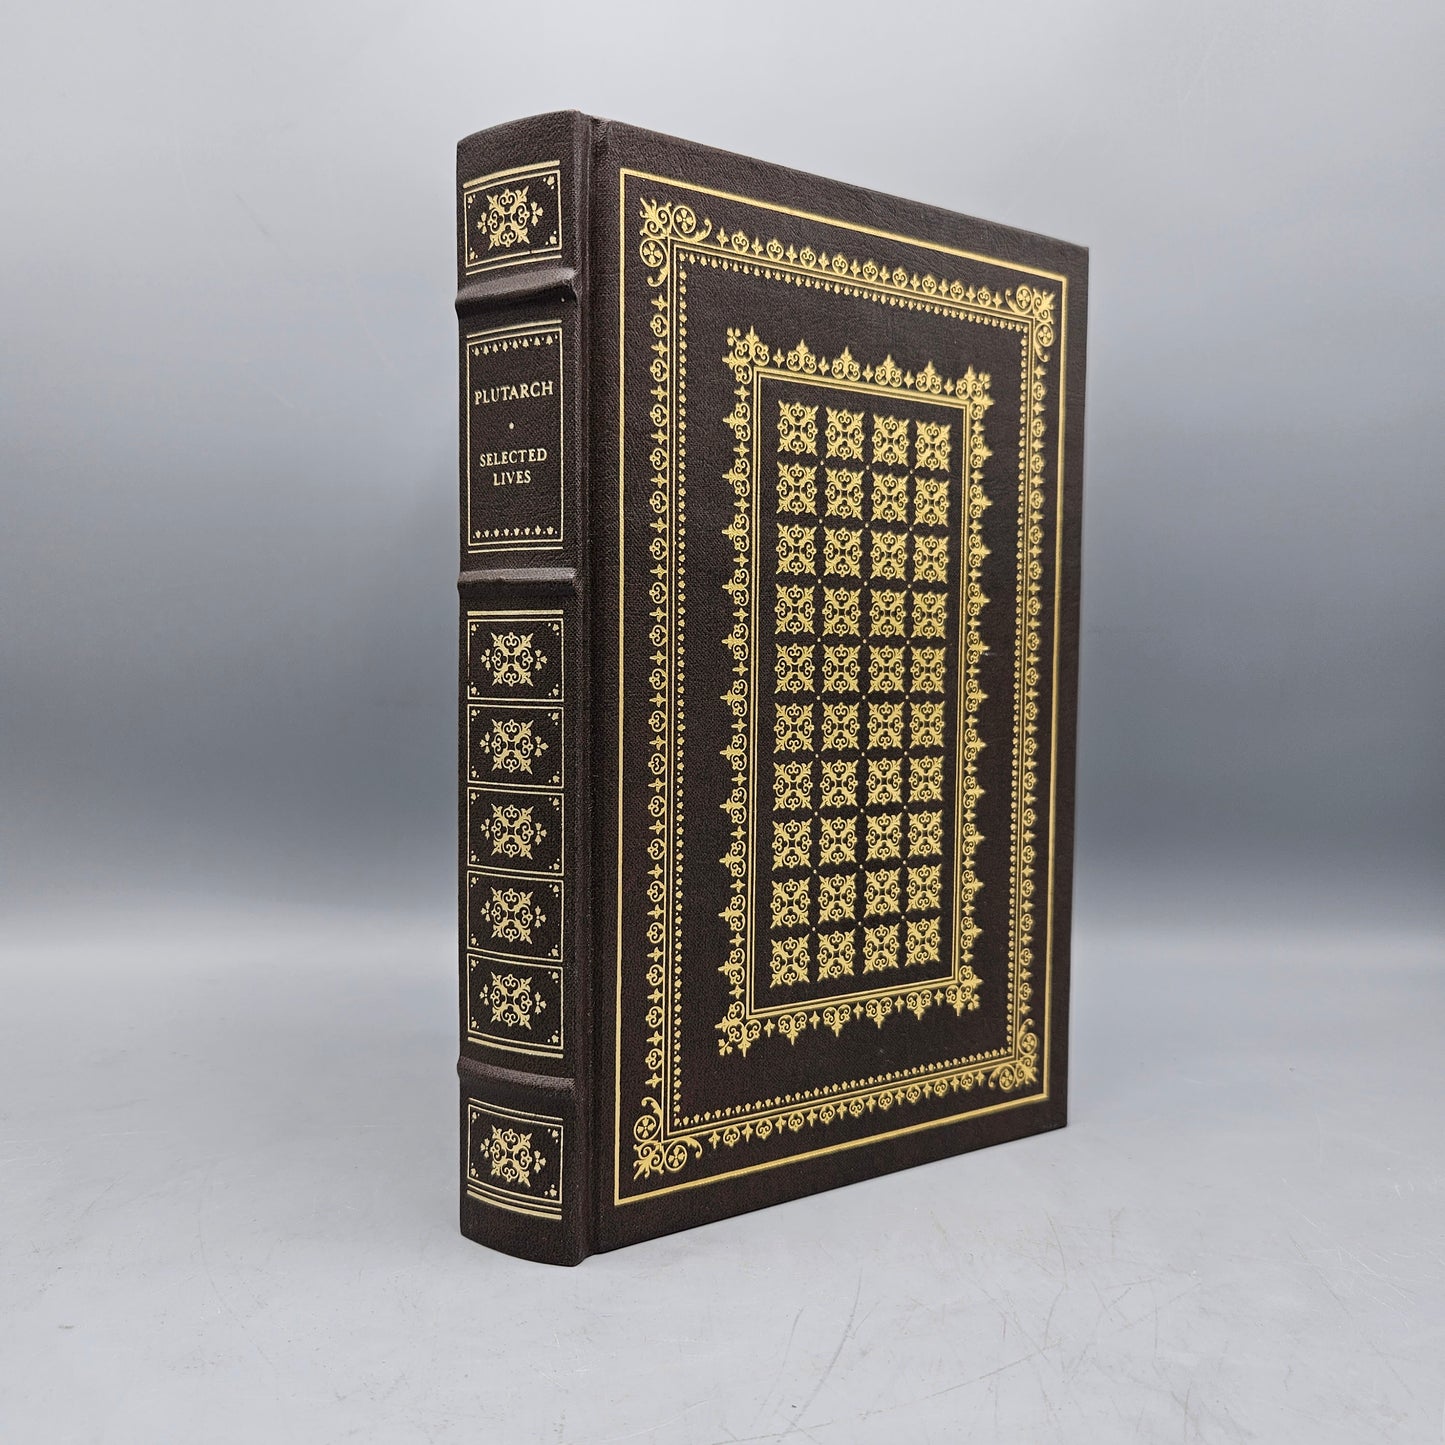 Leatherbound Book - Plutarch "Selected Lives" Franklin Library